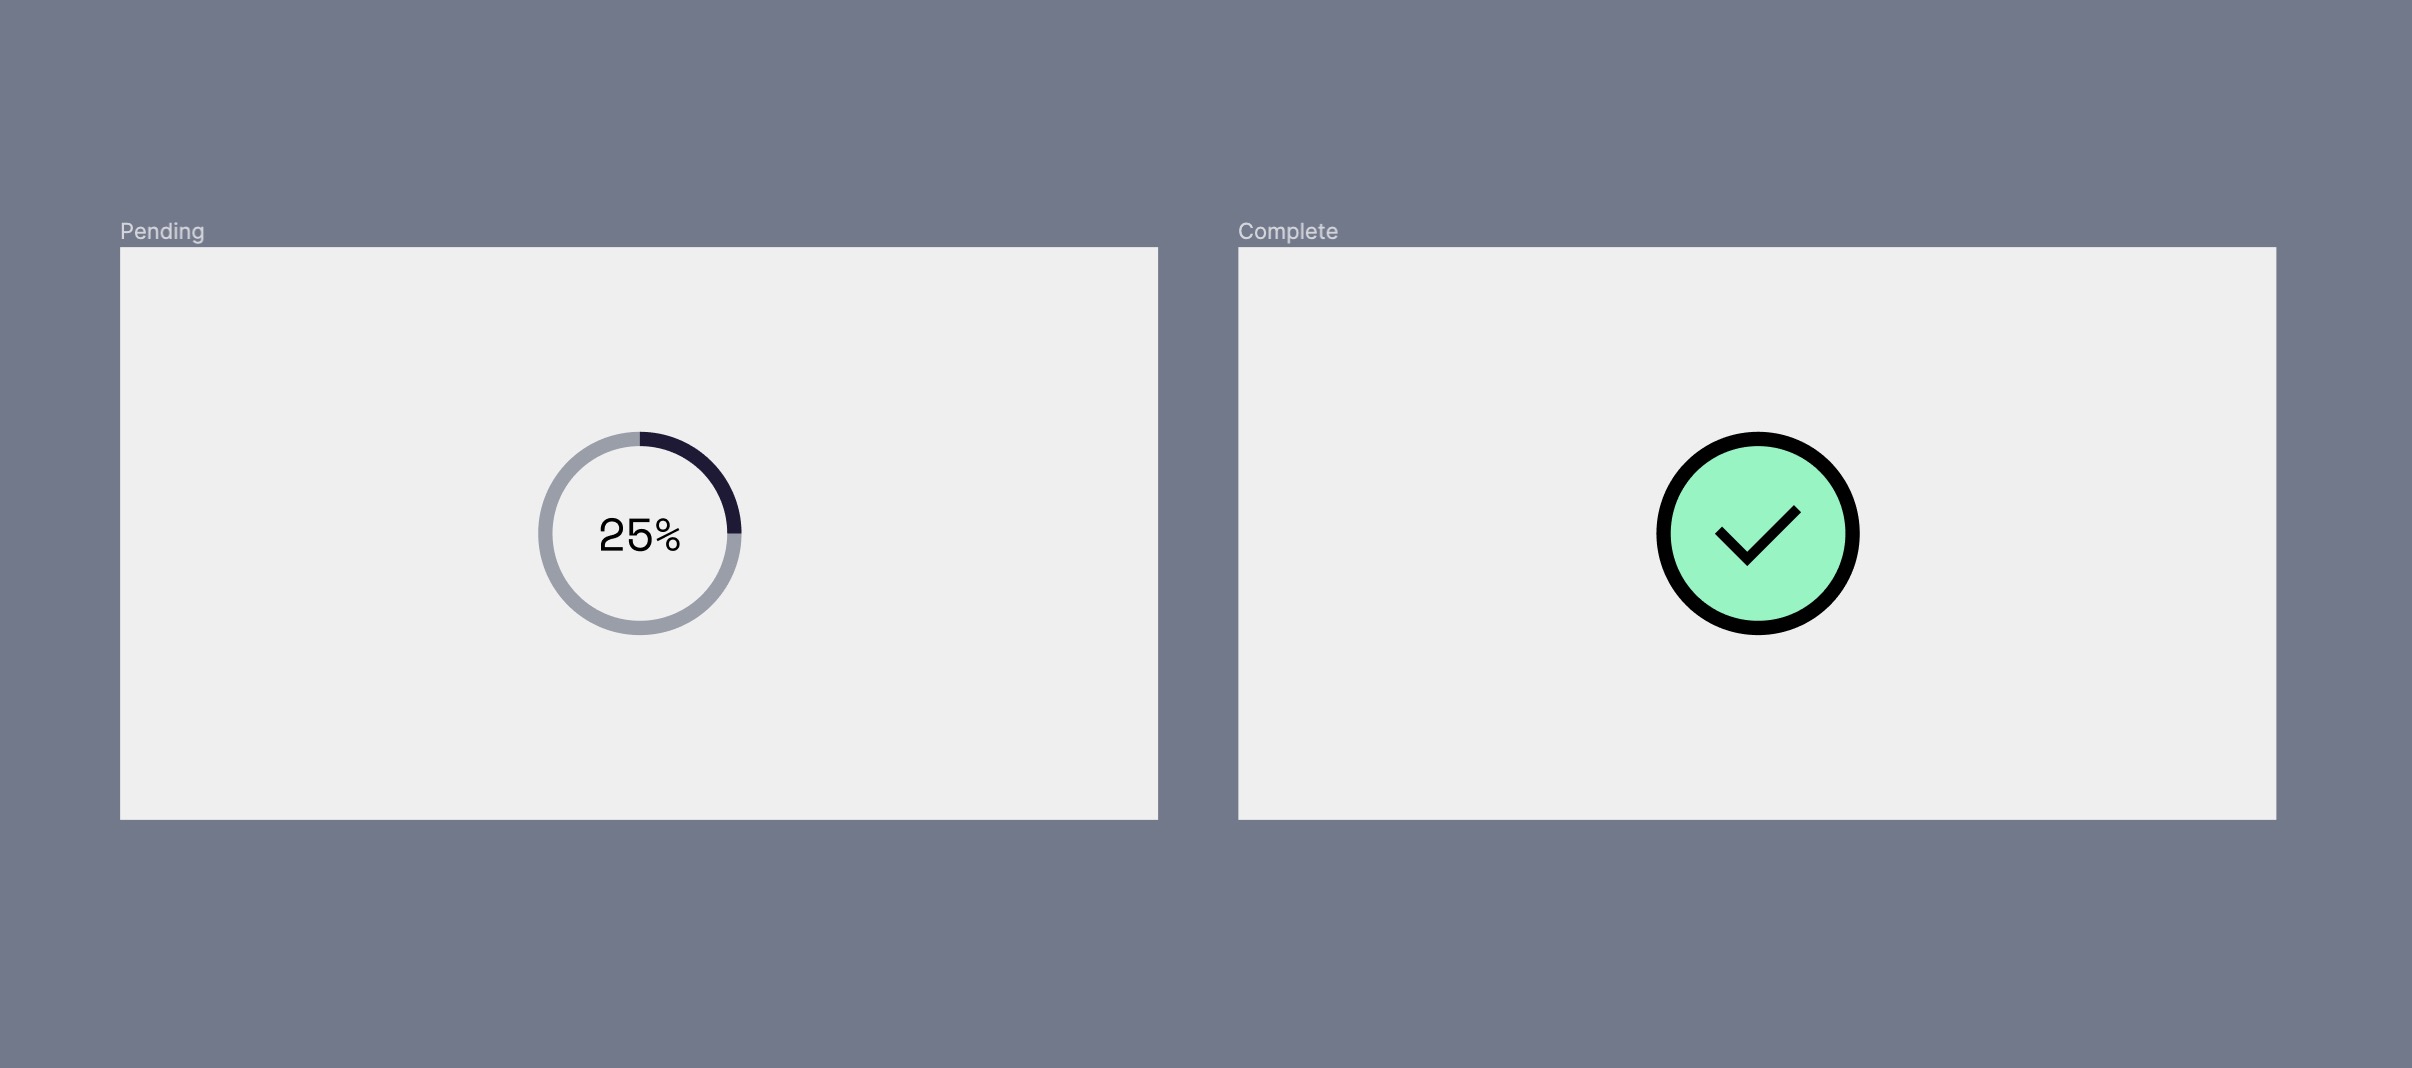 On the left, a progress indicator with 25% progress. On the right, a completed one where the text has been replaced with a checkmark